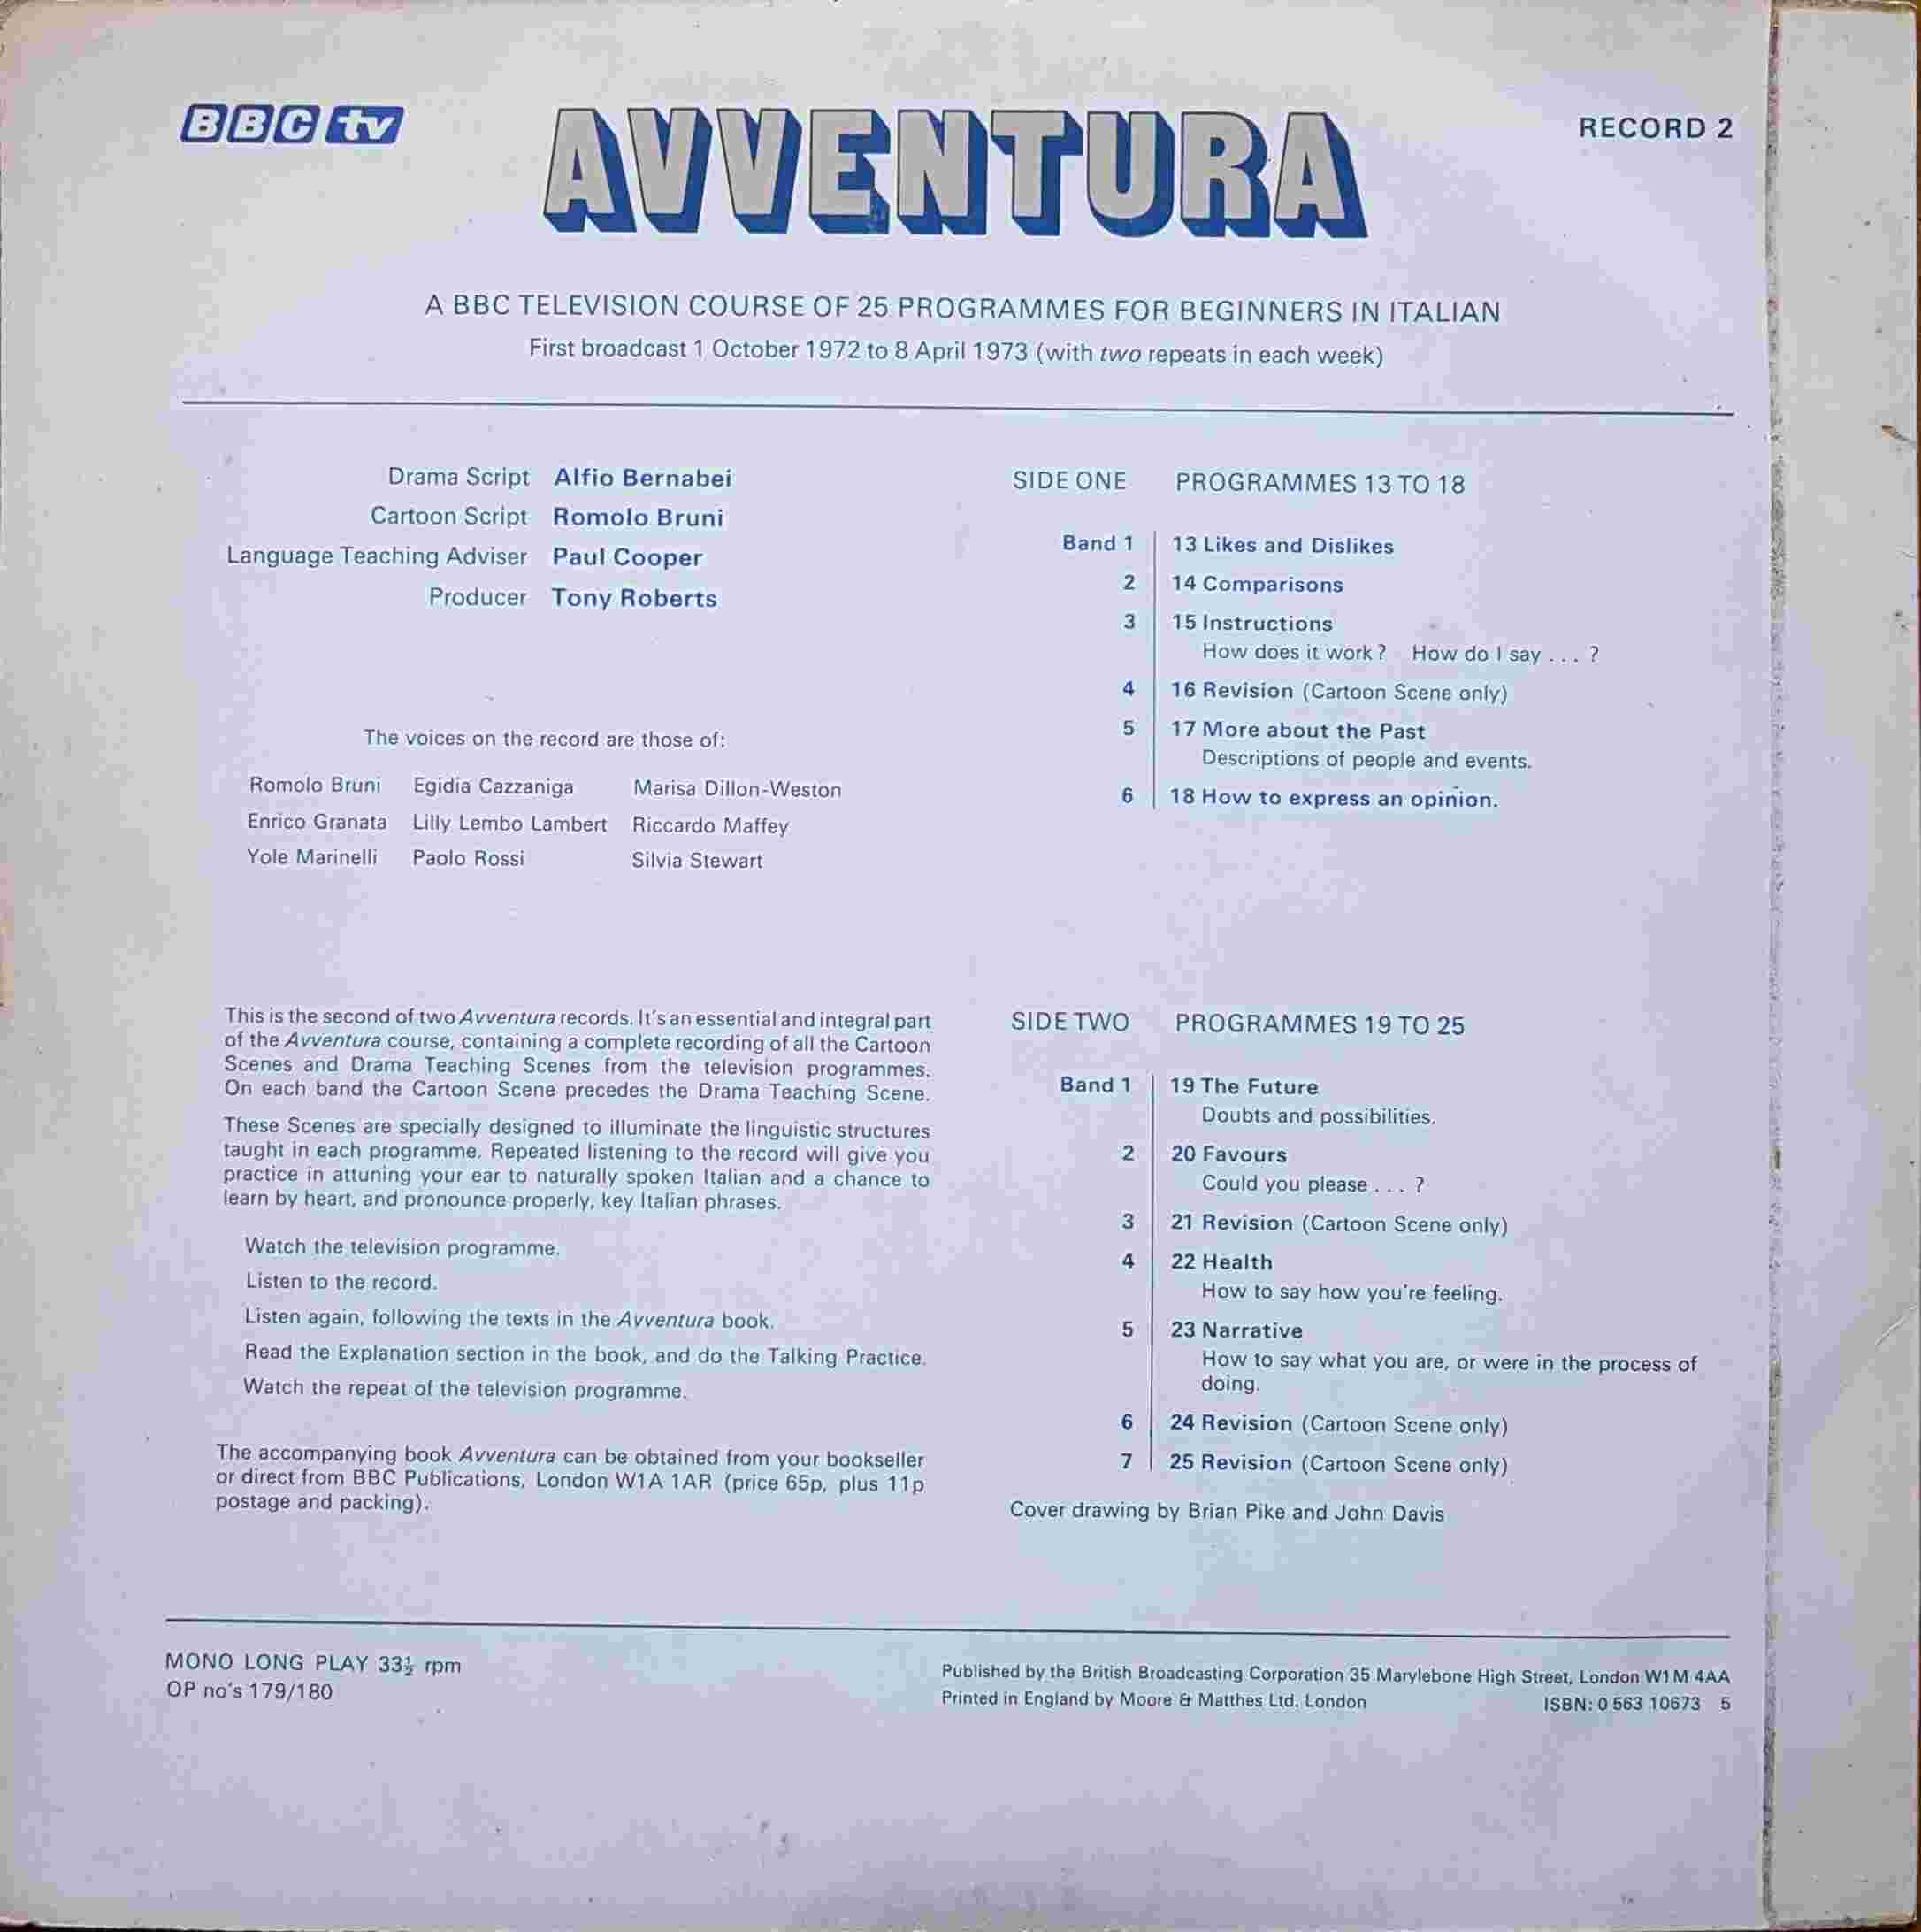 Picture of OP 179/180 Avventura - A beginner's course in Italian - Record 2 - Programmes 13 - 25 by artist Alfio Bernabei / Romolo Bruni from the BBC records and Tapes library